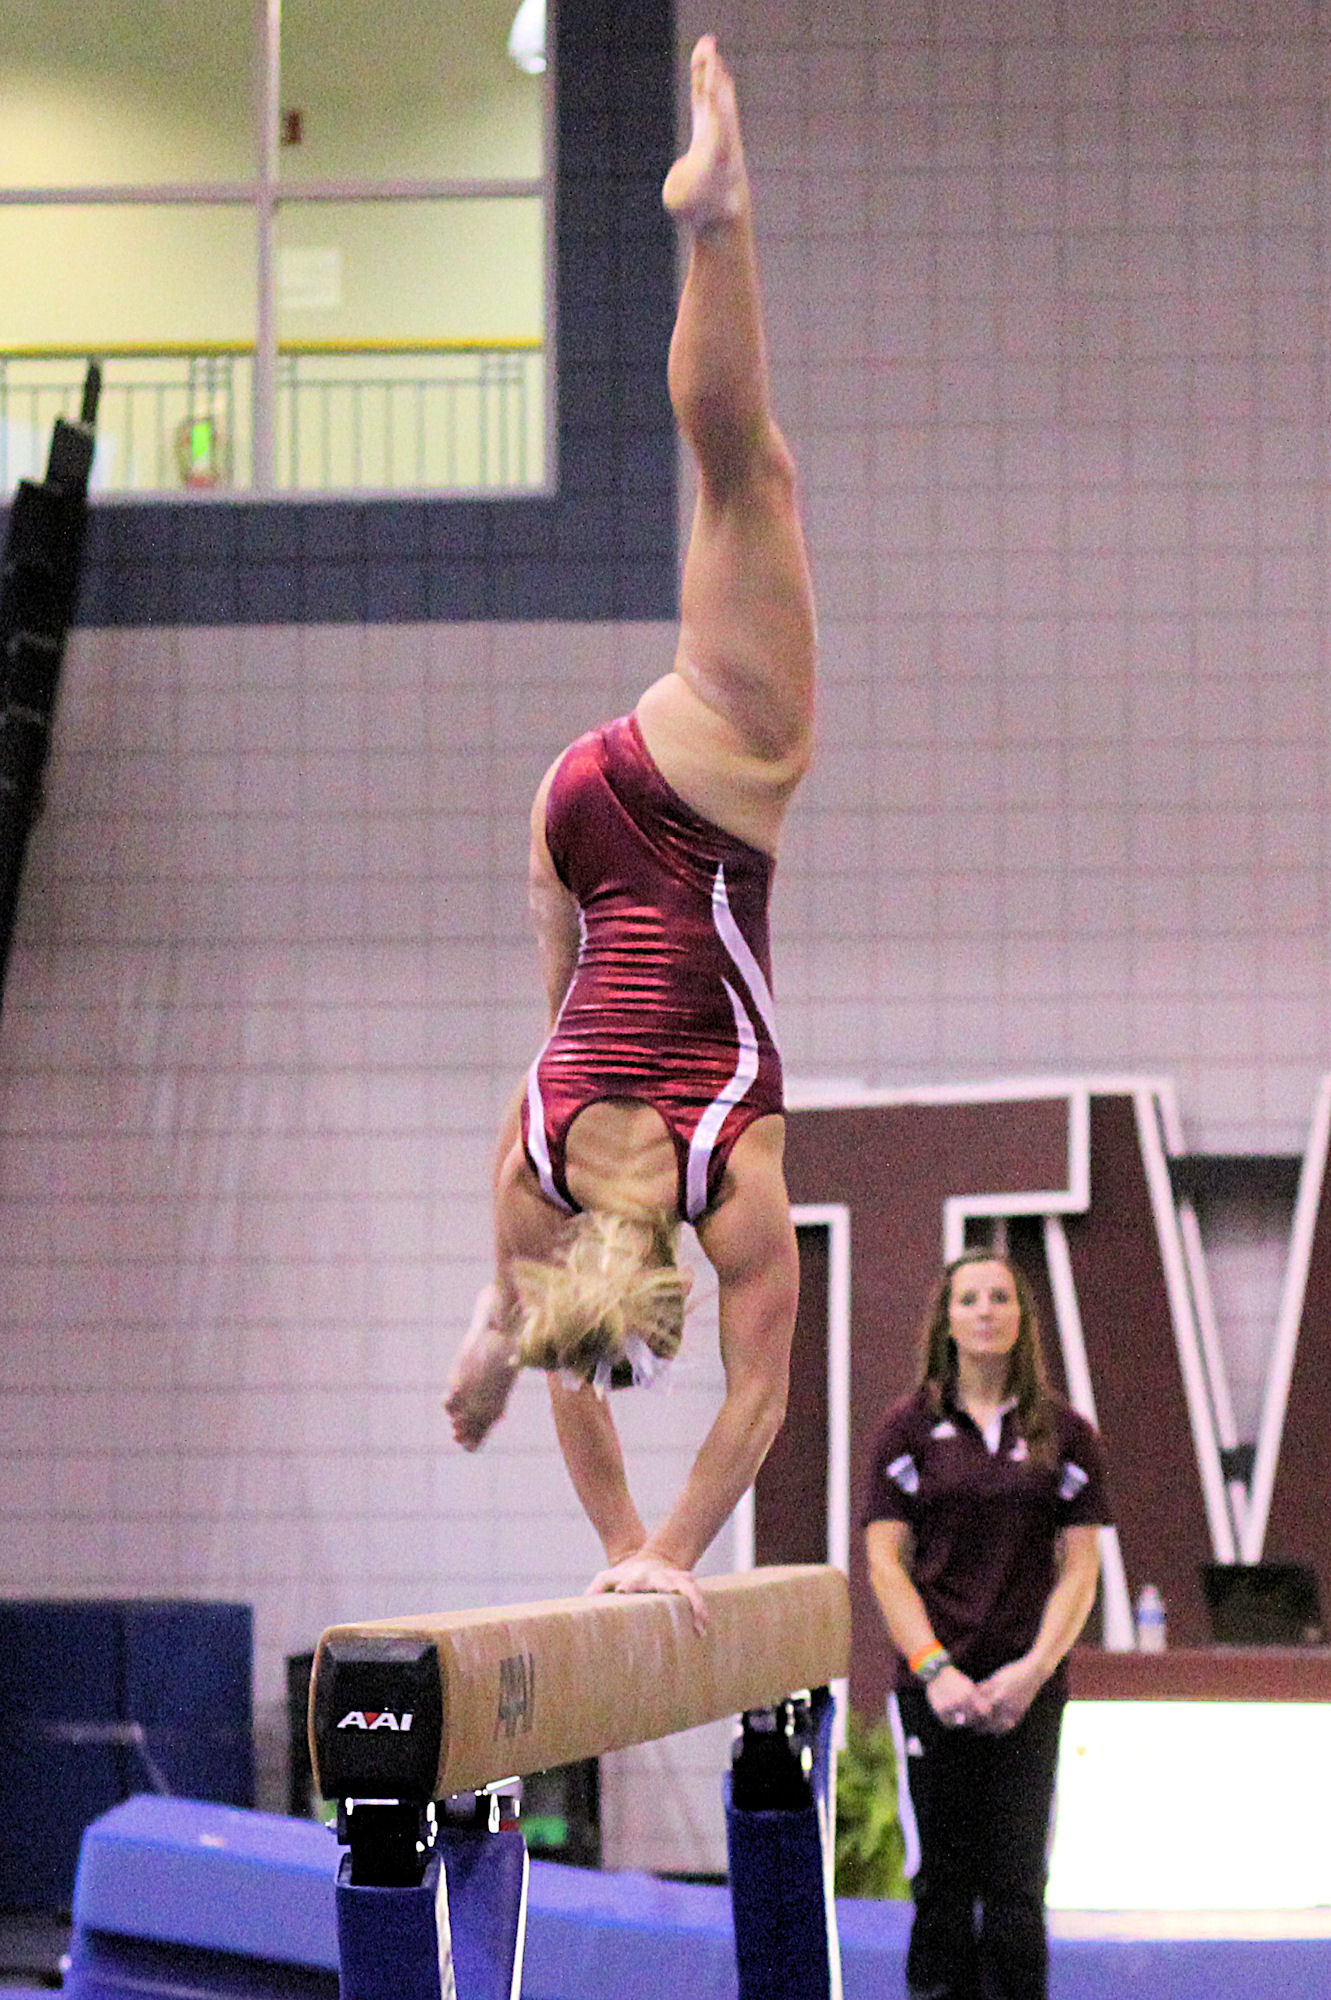 a young woman in a maroon and white leotard doing a splits exercise on the parallel bars